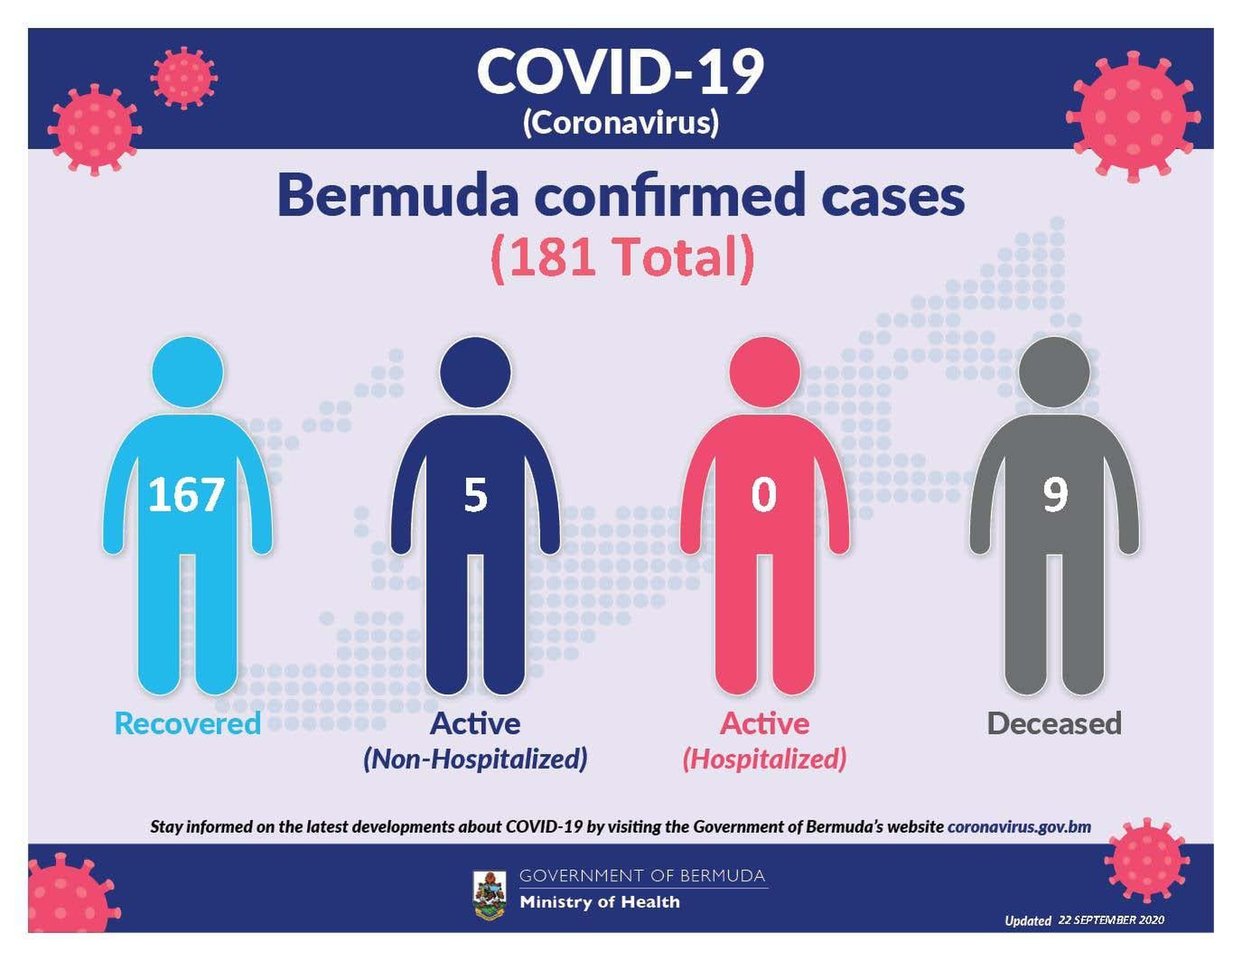 No new COVID-19 cases reported in Bermuda, 24 September